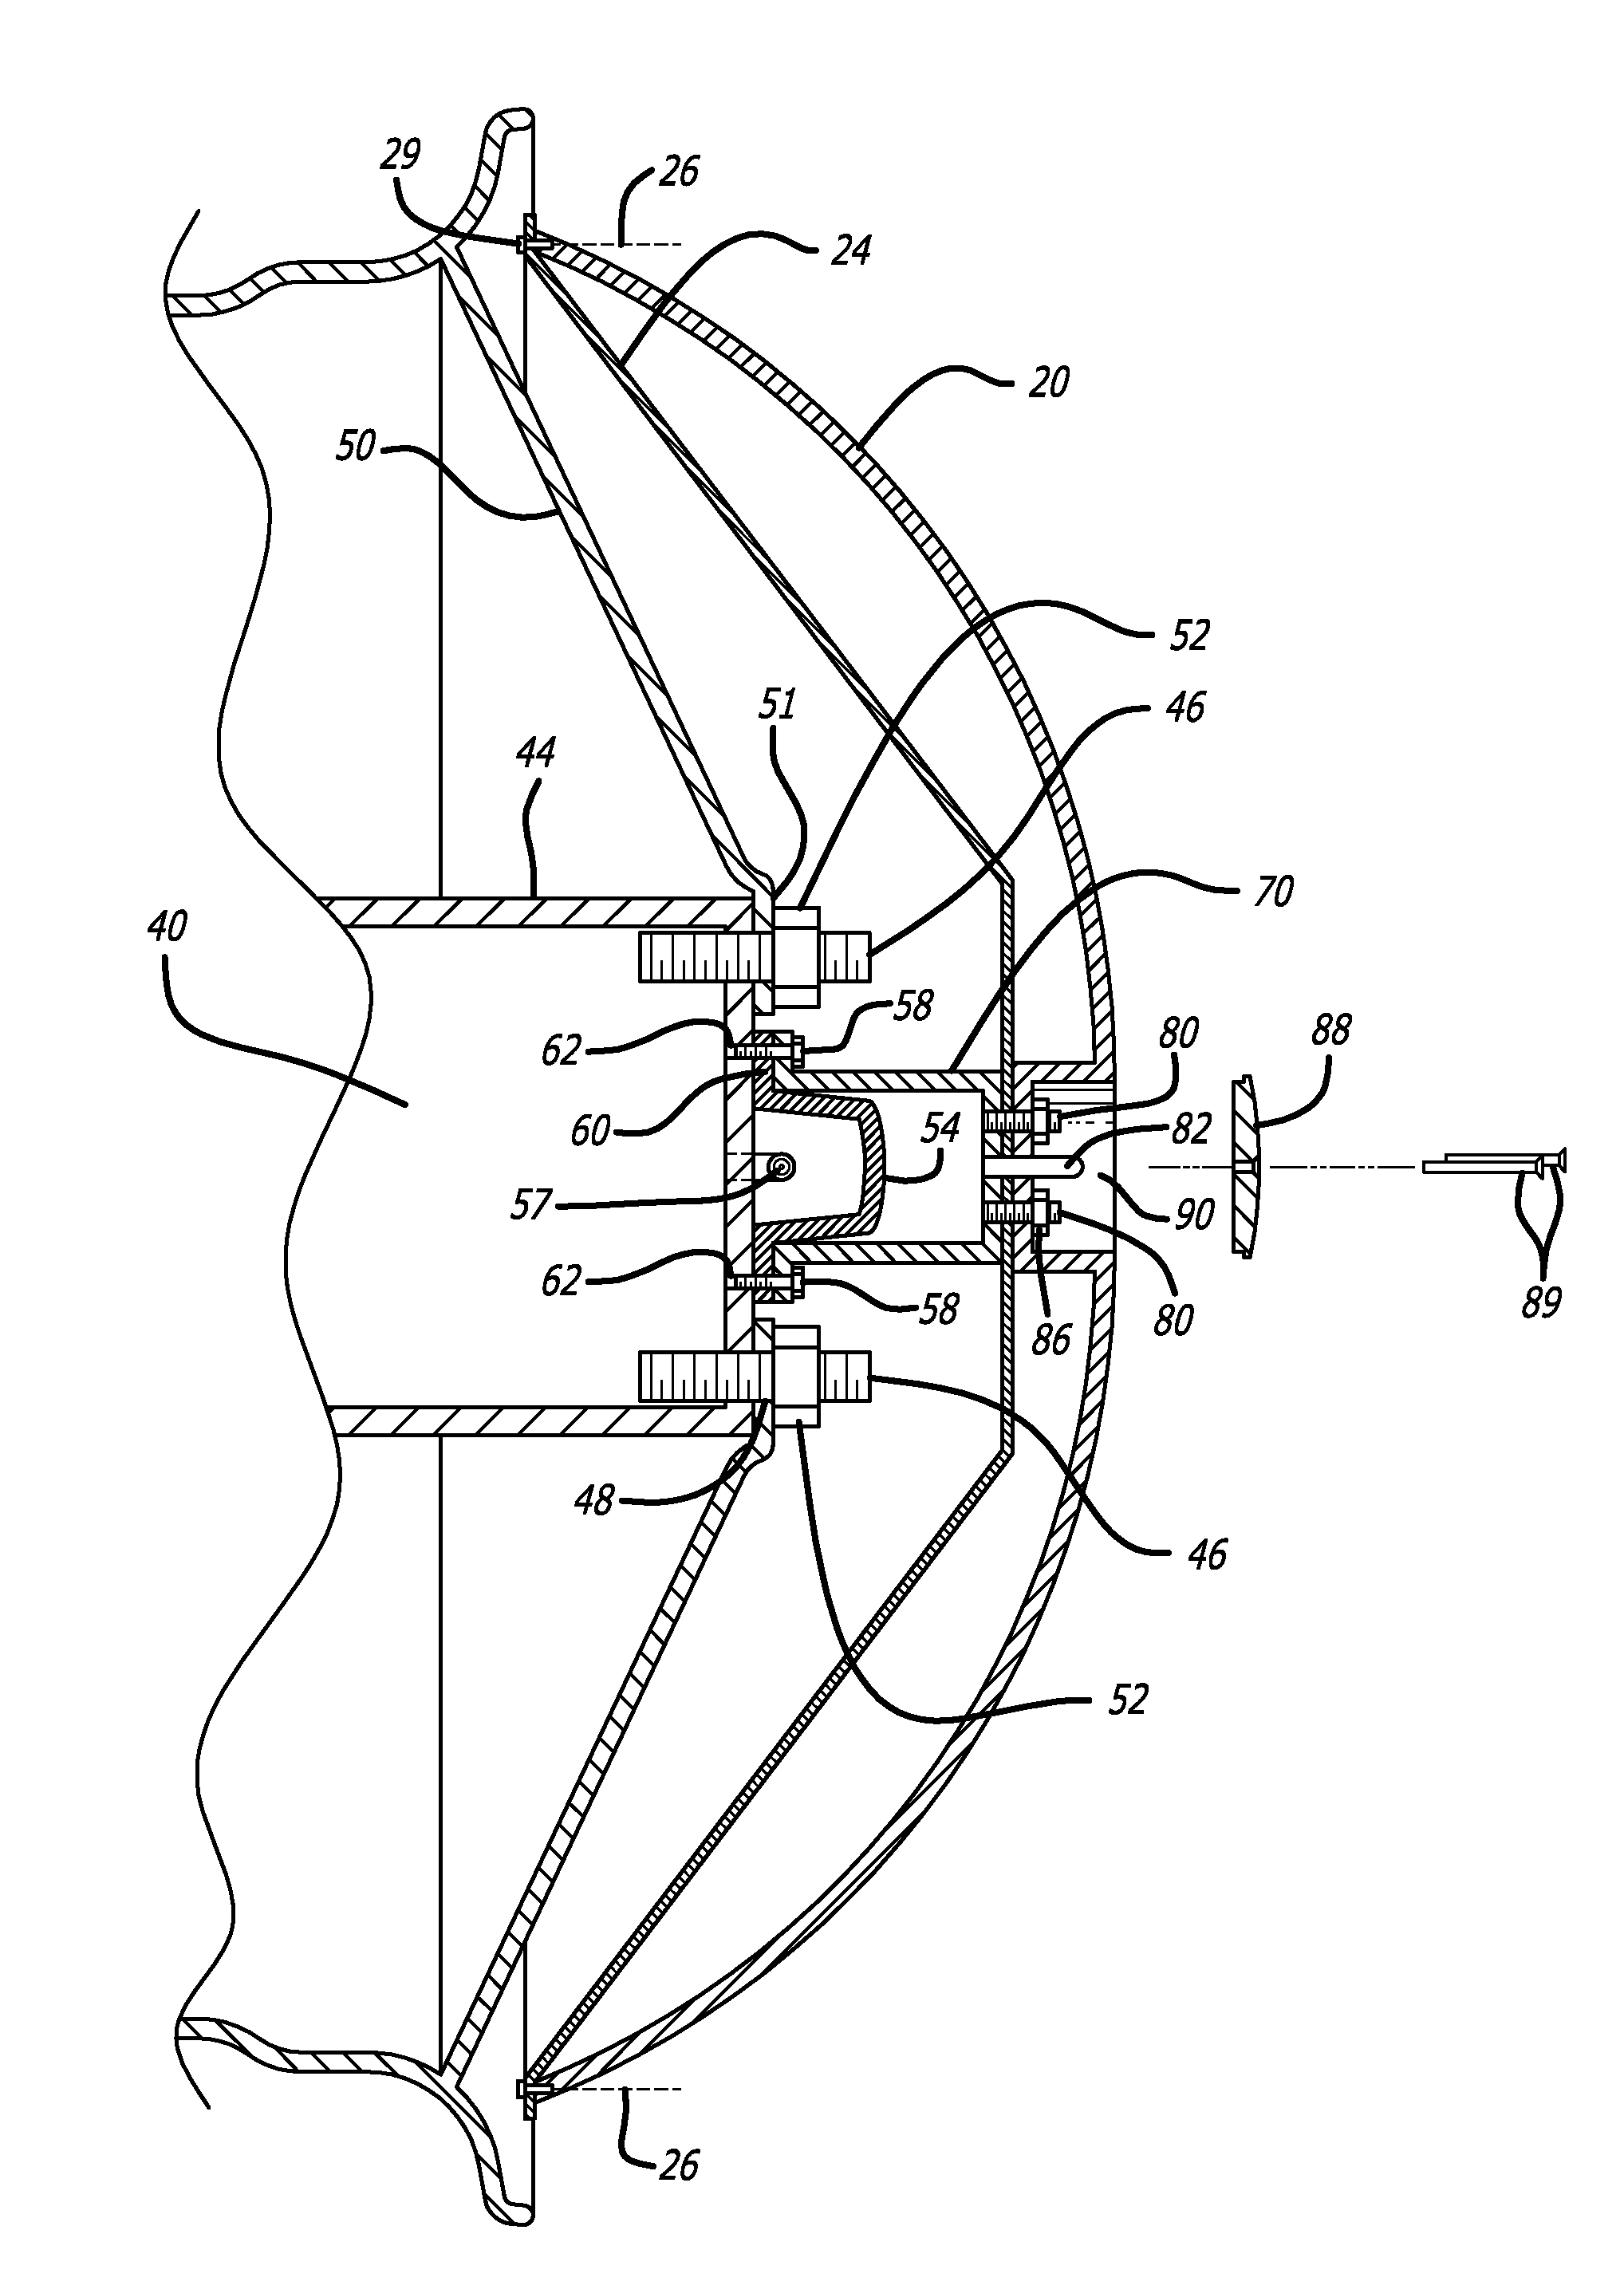 Wheel covering system